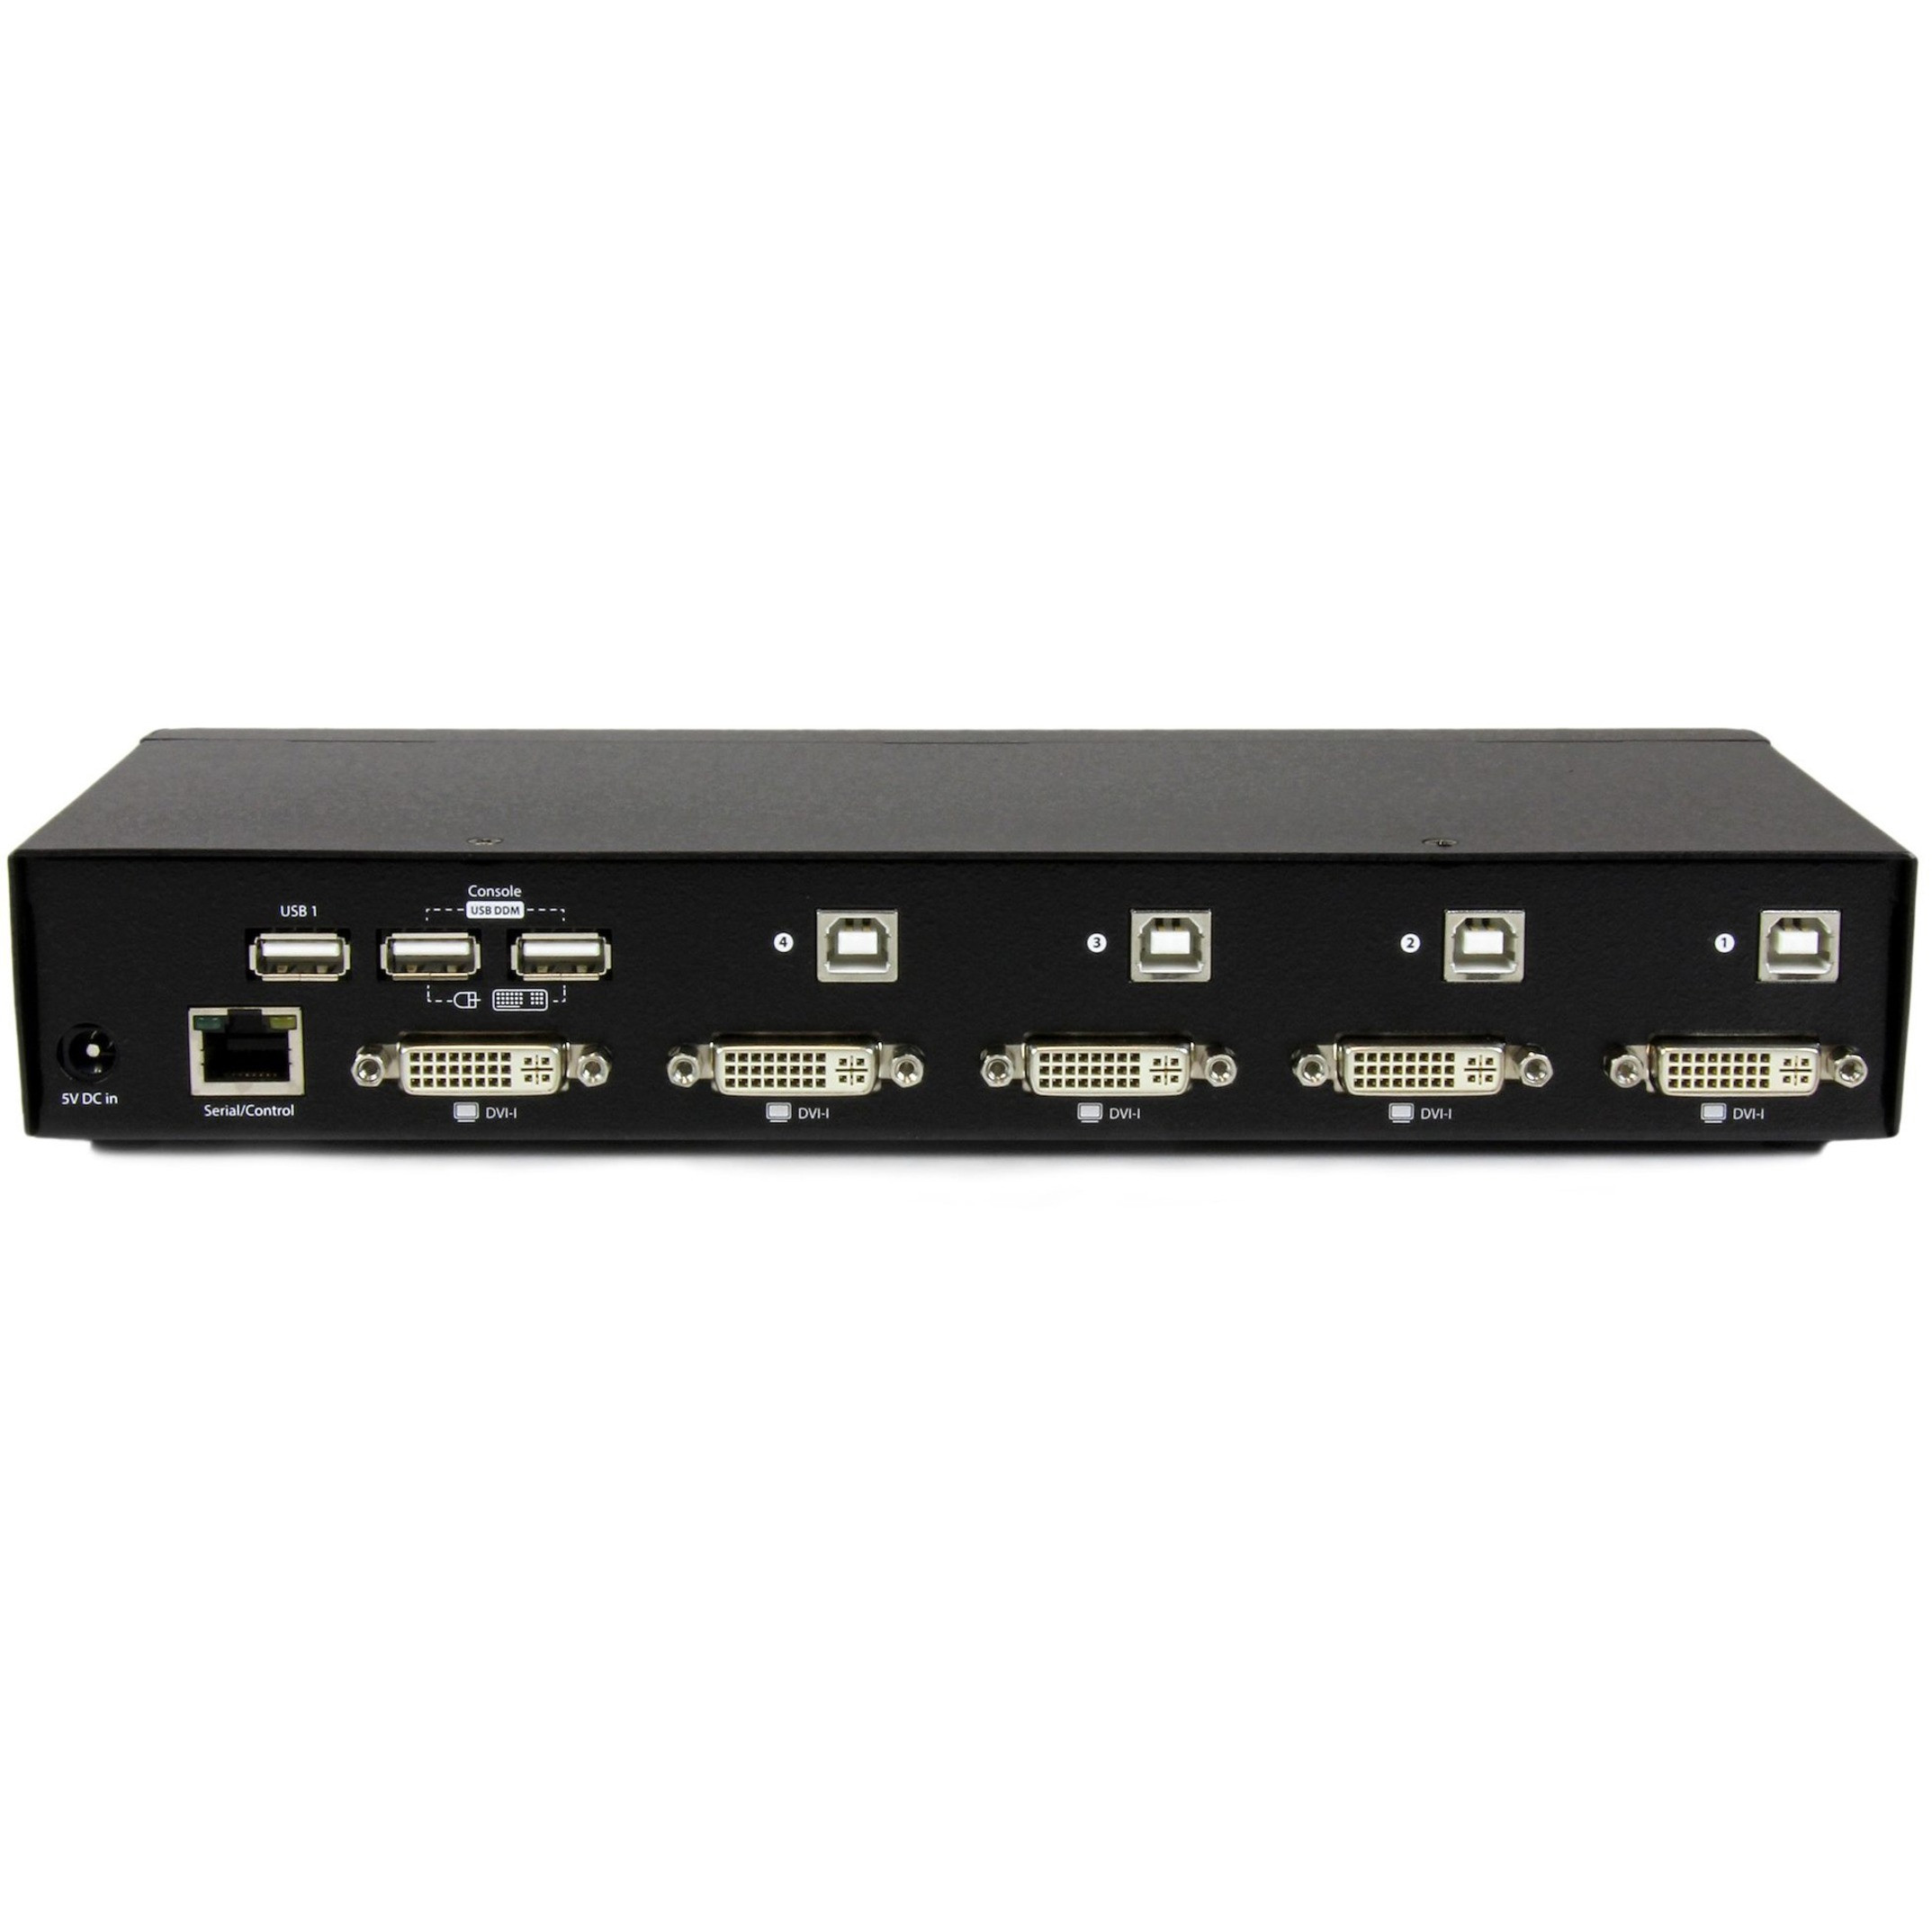 Startech .com 4 Port USB DVI KVM Switch with DDM Fast Switching Technology and CablesControl 4 DVI, USB-equipped PCs with a single periph… SV431DVIUDDM